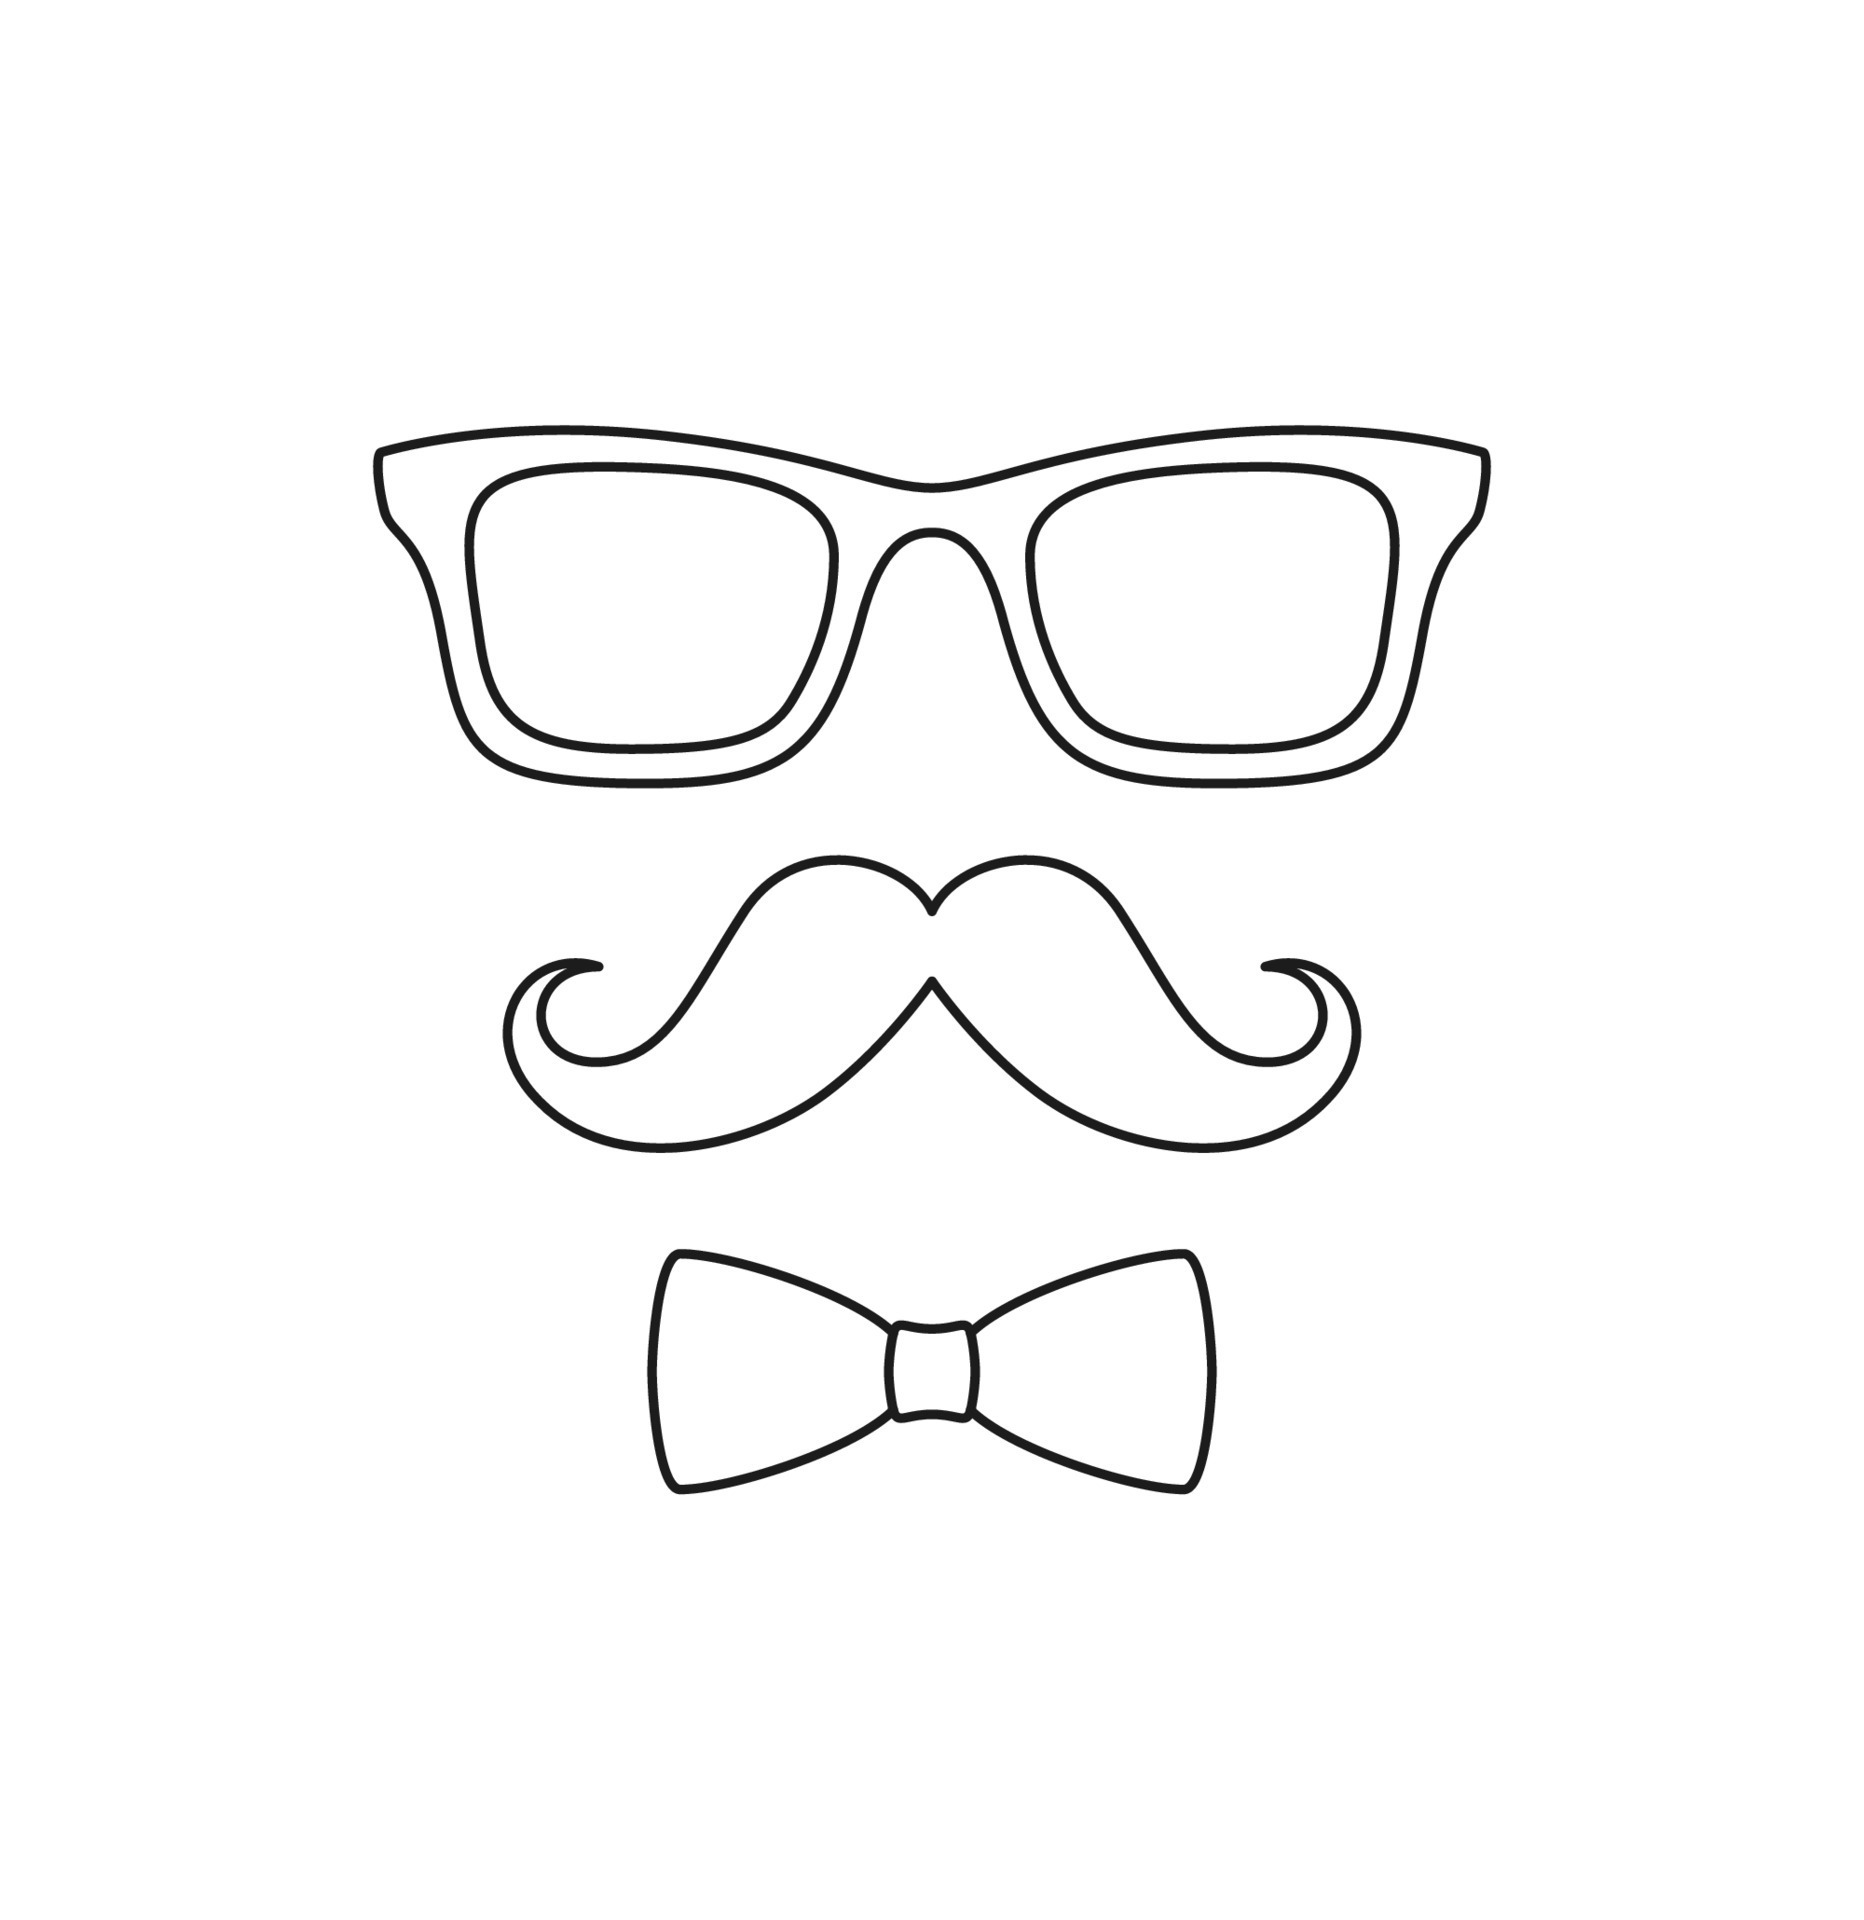 Coloring page with Mustache, Bow Tie, and Glasses for kids 9955832 Vector  Art at Vecteezy